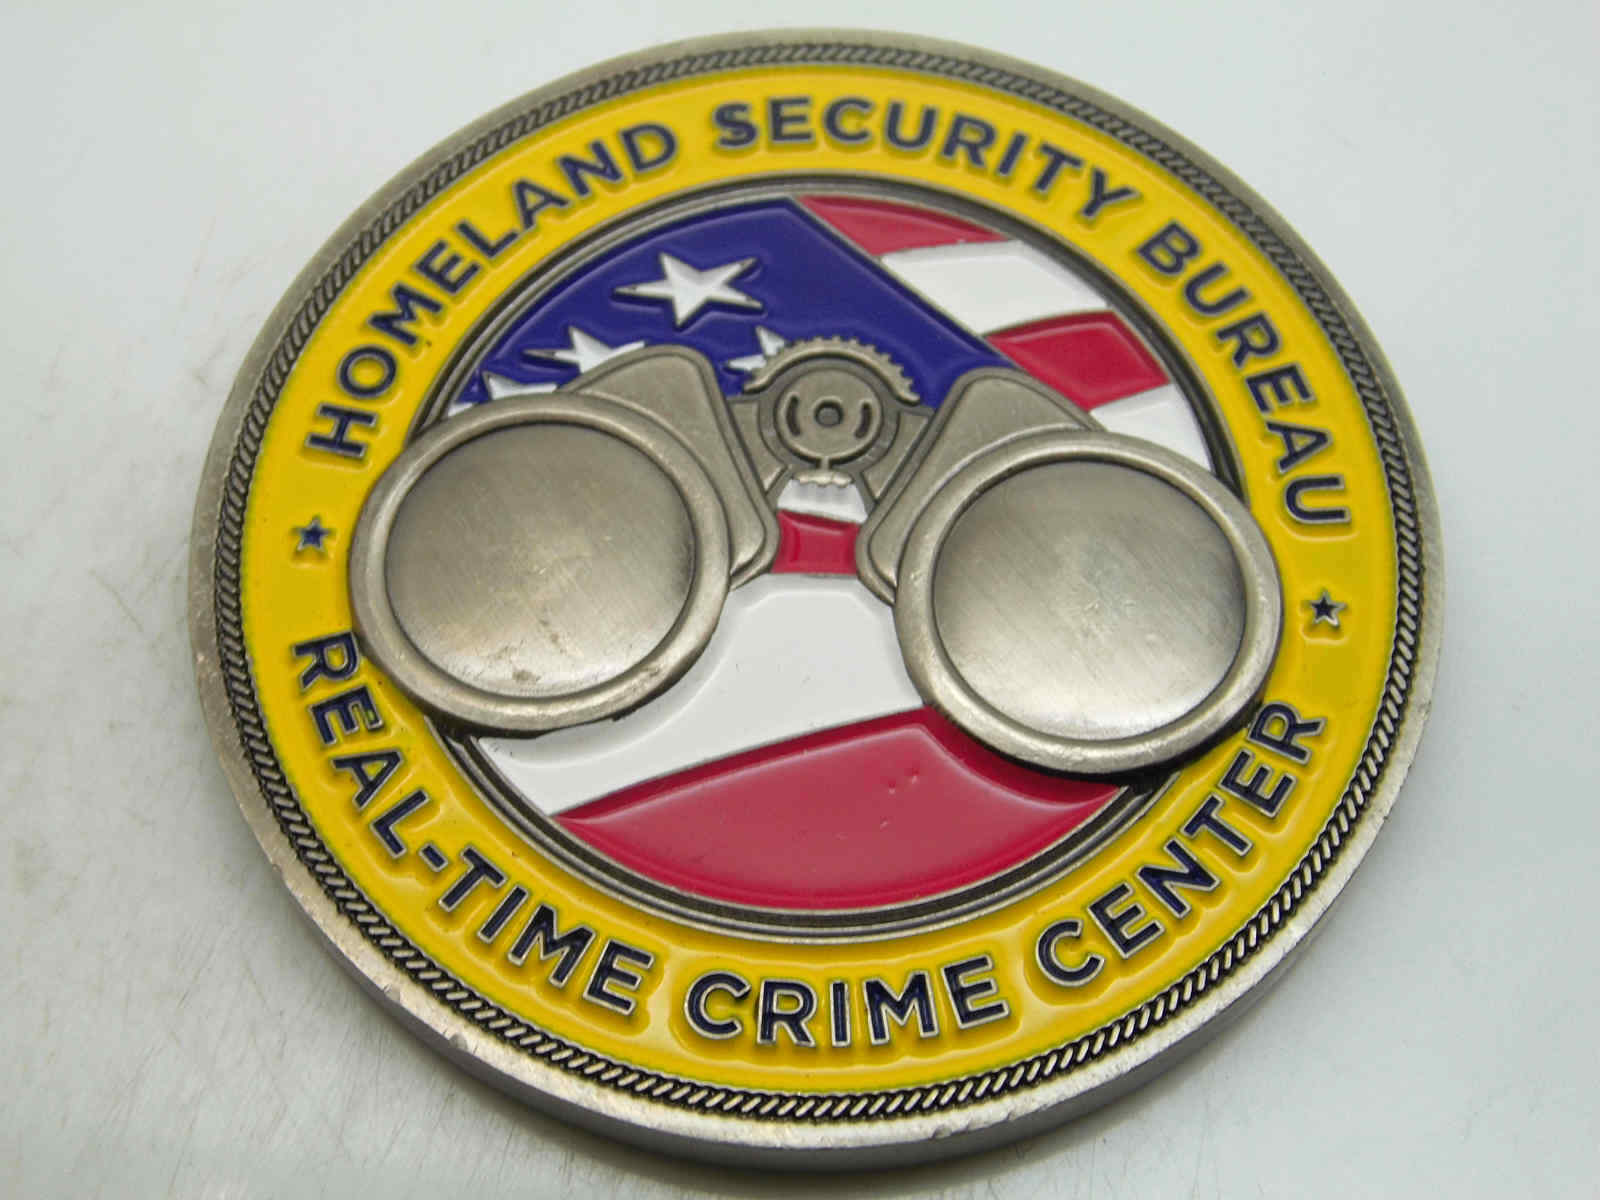 REAL TIME CRIME CENTER DEPUTY SHERIFF CHALLENGE COIN